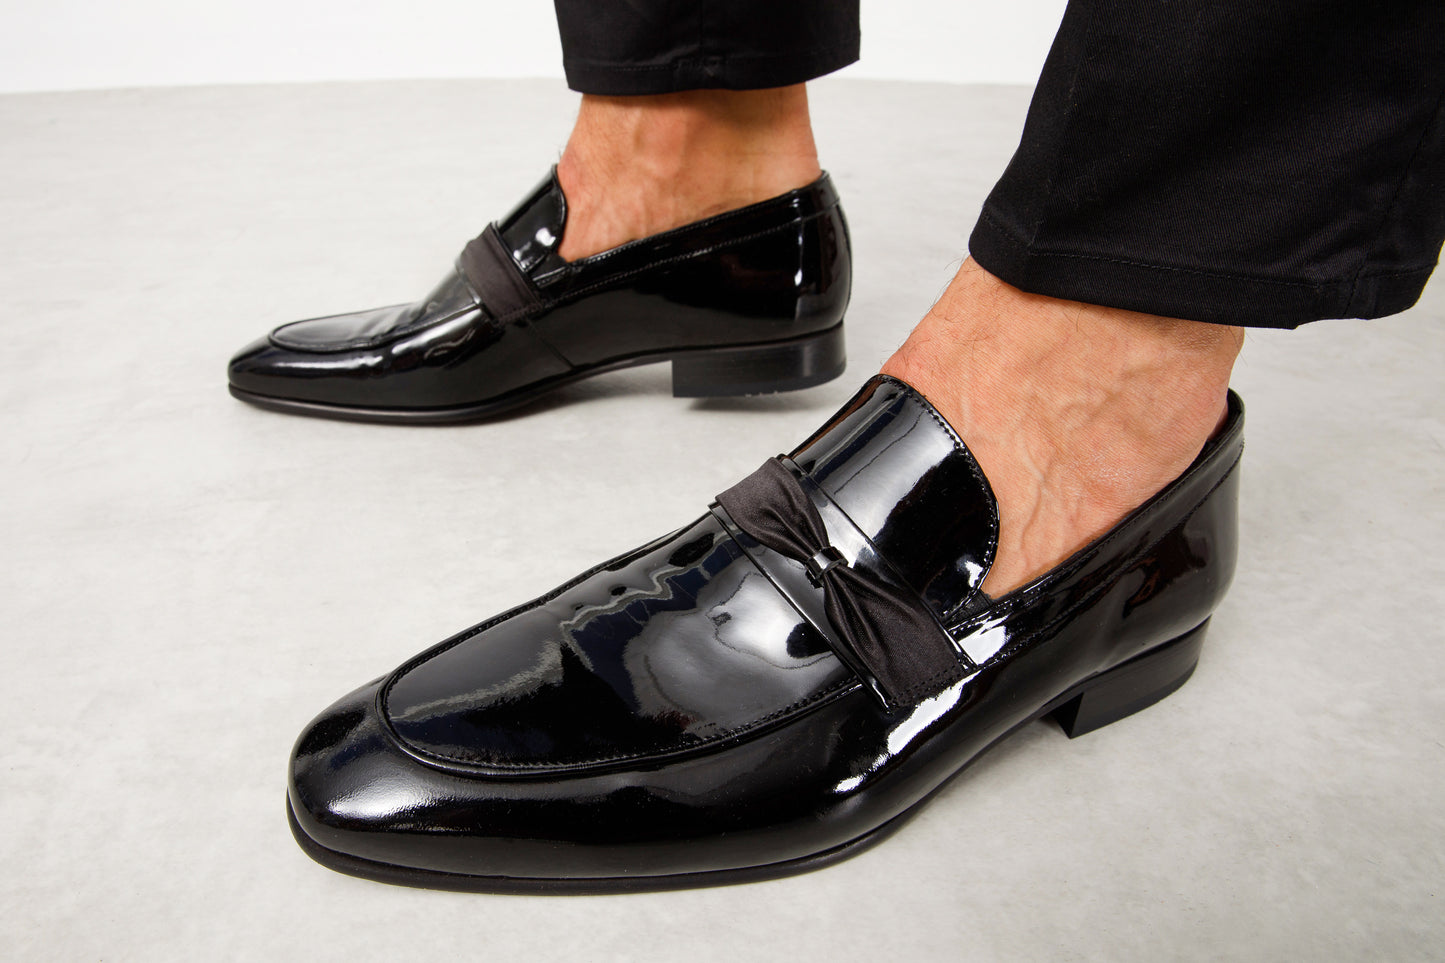 The Dodoma Black Patent  Leather Loafer Men Shoe